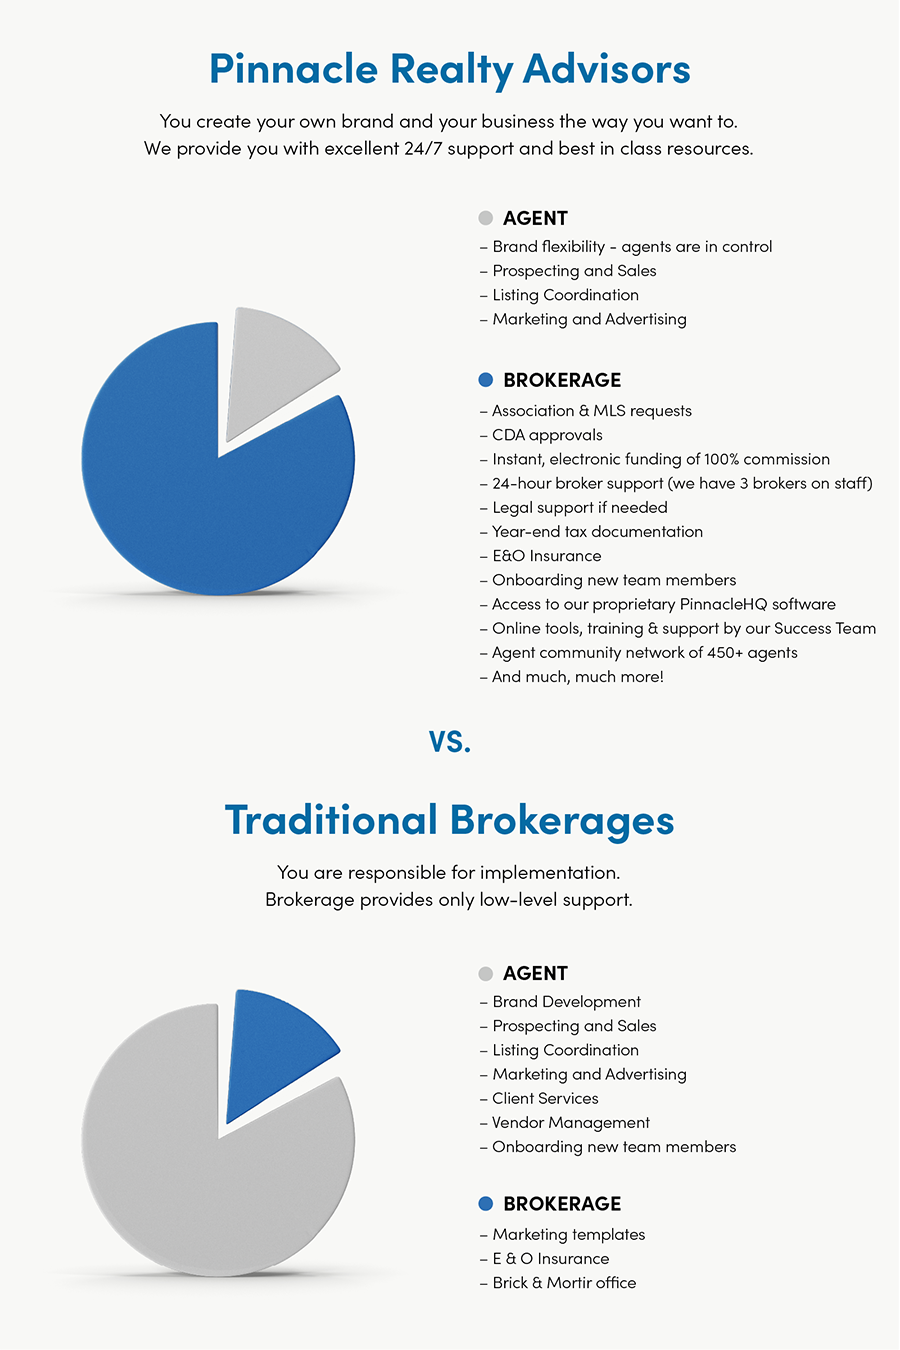 brokerage as a service -baas-_compared_to_traditional_brokerage